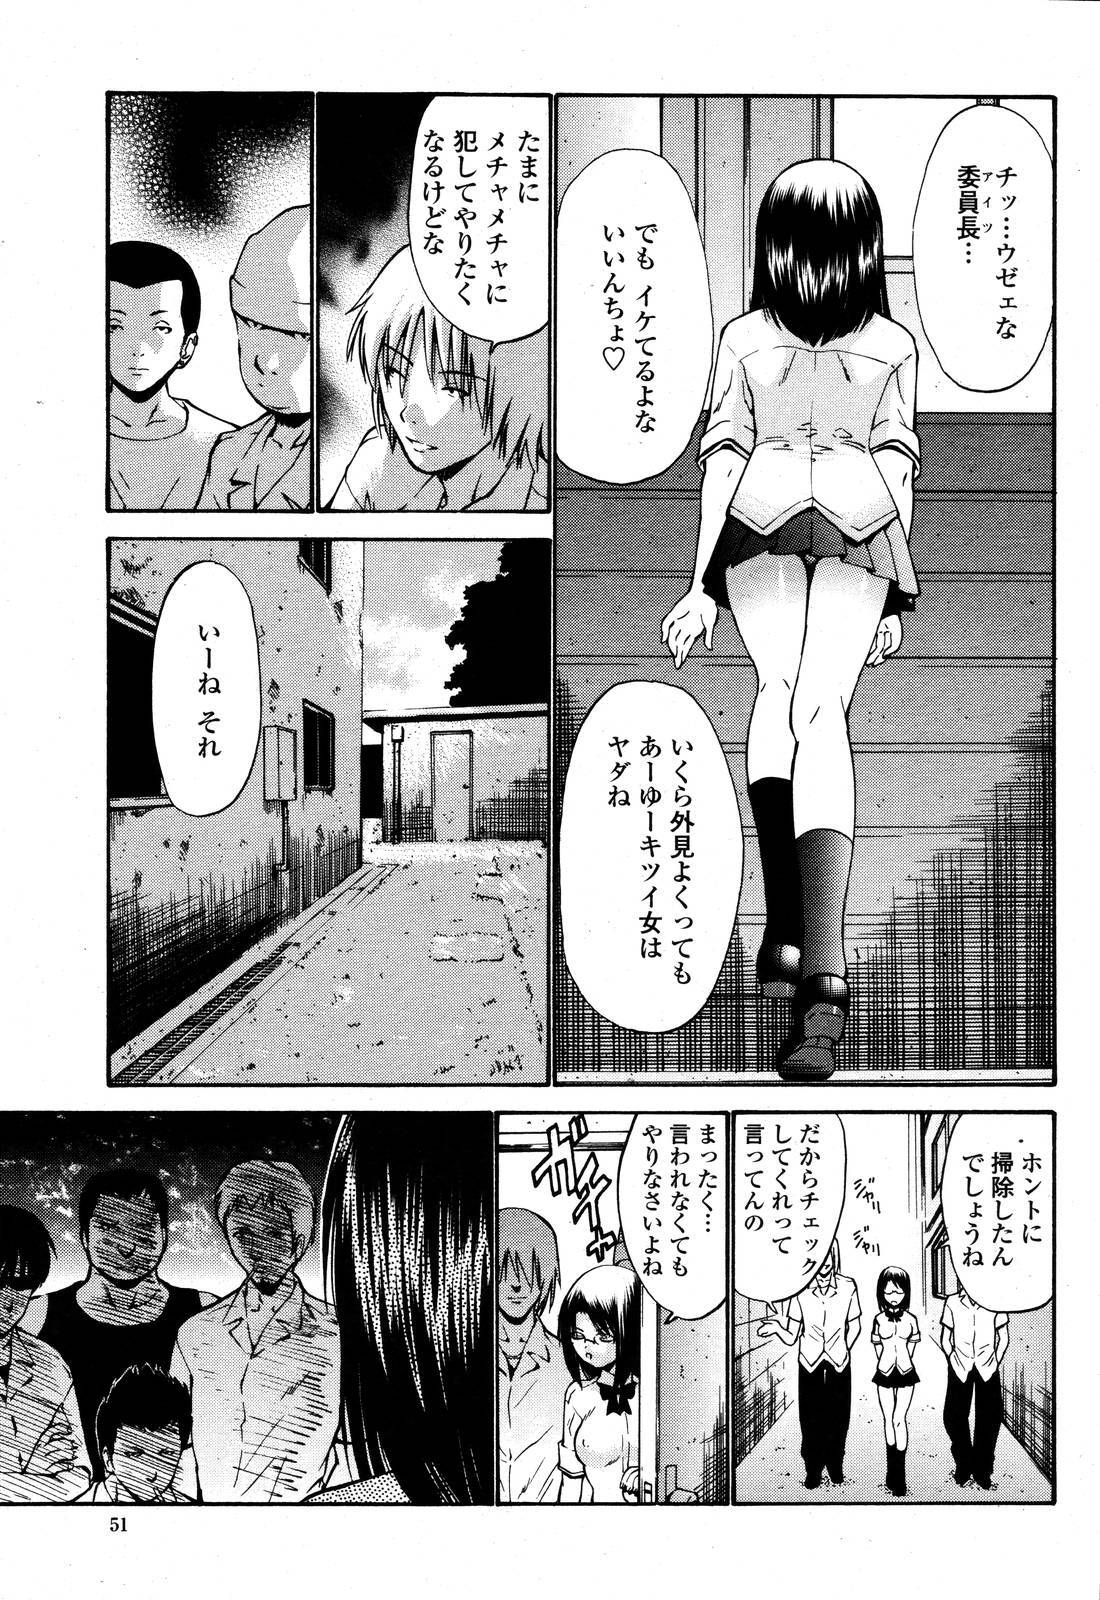 COMIC Momohime 2006-10 page 53 full